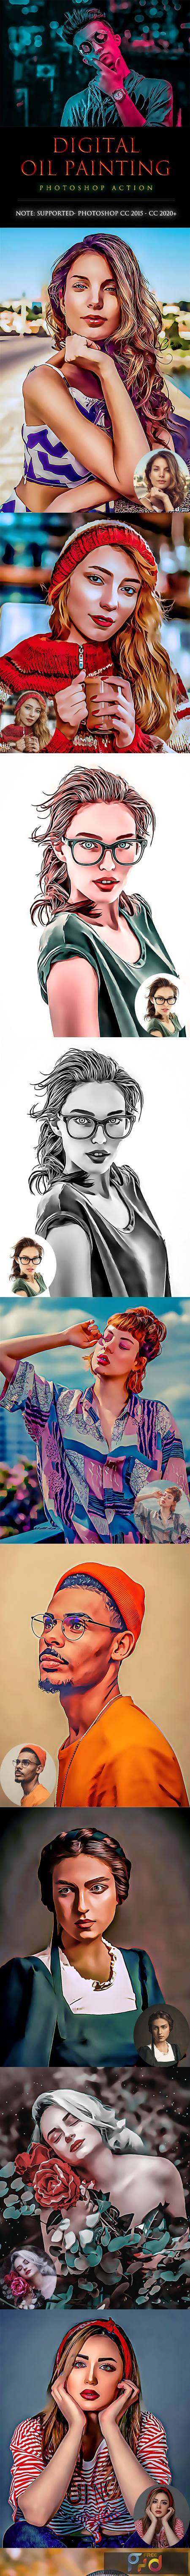 Digital OiL painting PhotoShop Action 28368497 1